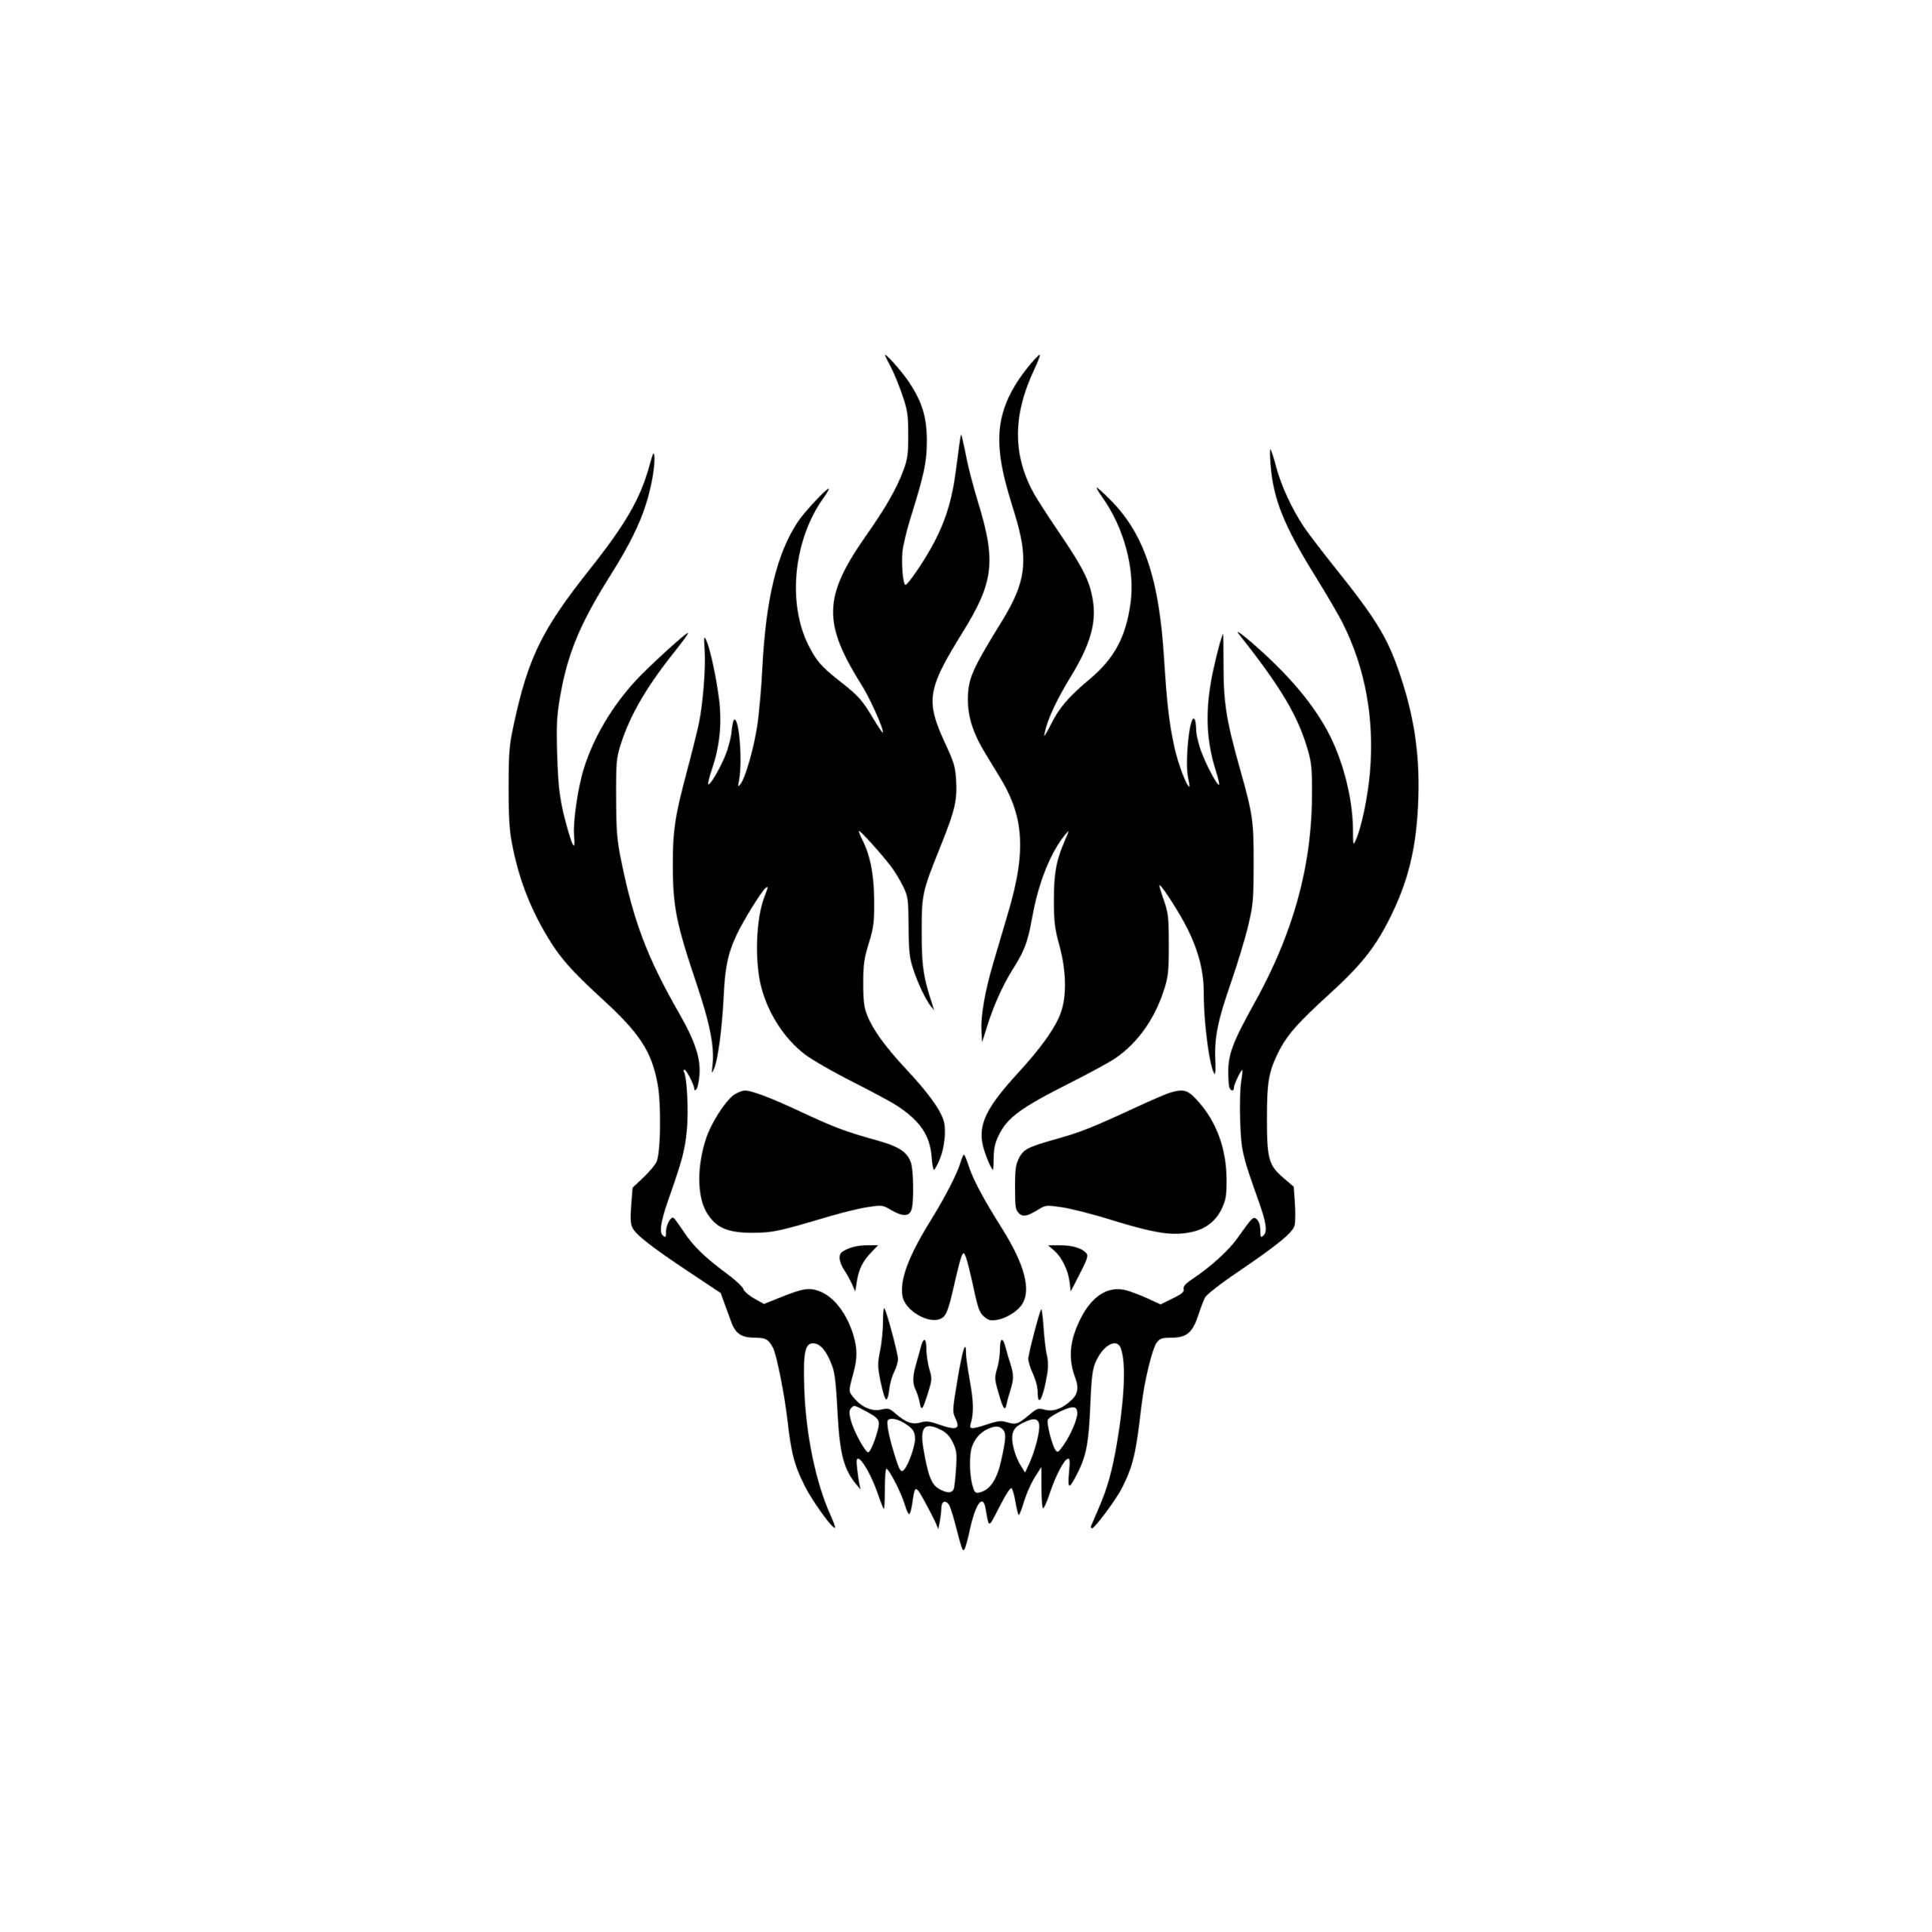 Fire Skull SVG Image: Perfect for Cricut, Silhouette, Laser Crafts